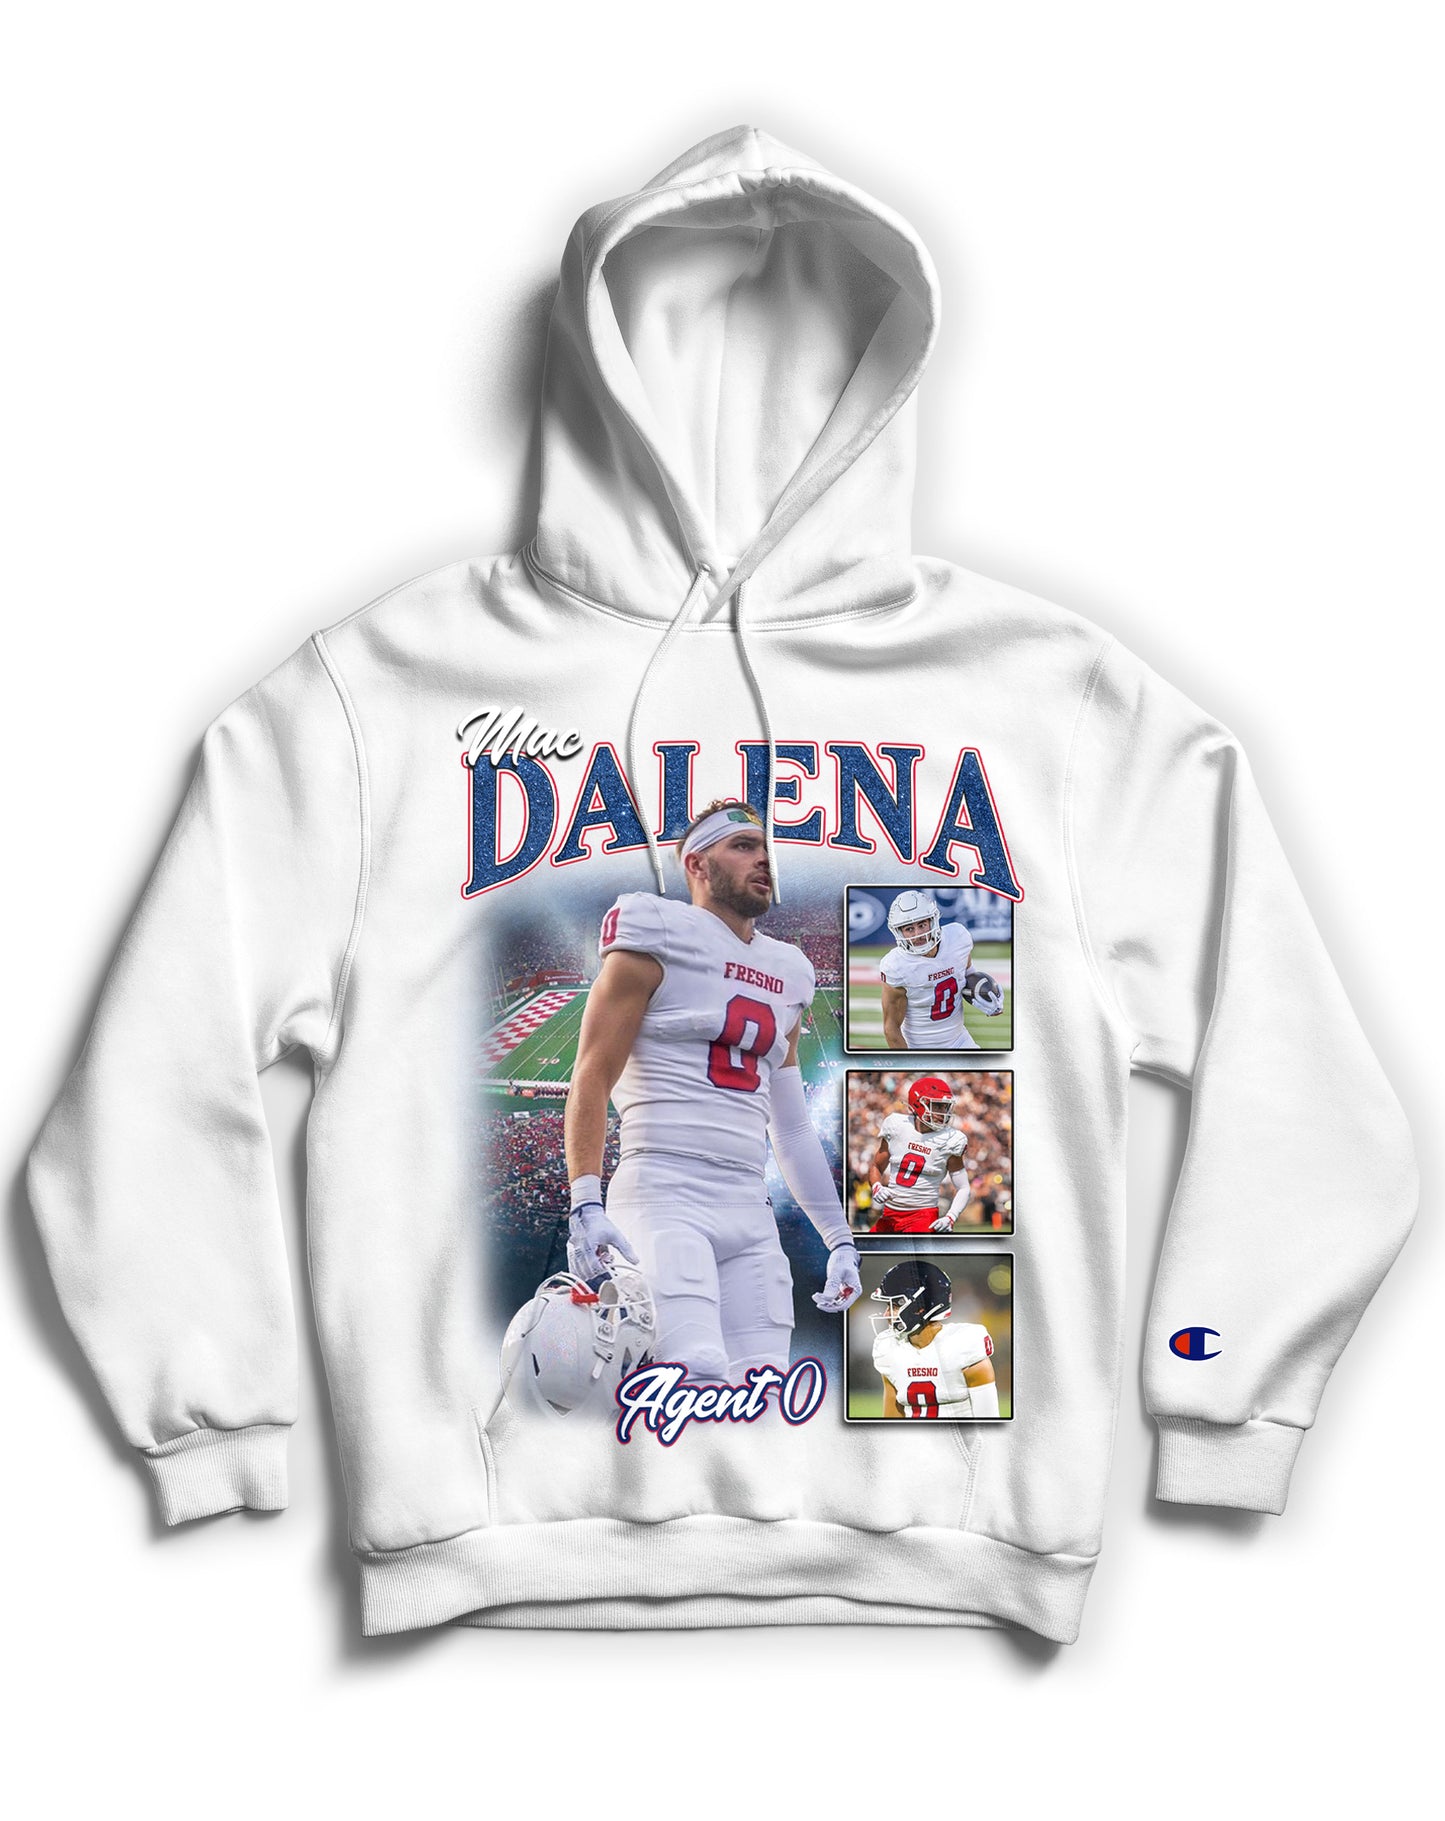 Mac "Agent 0" Dalena Tribute Hoodie *LIMITED EDITION* (Black, Red, White)